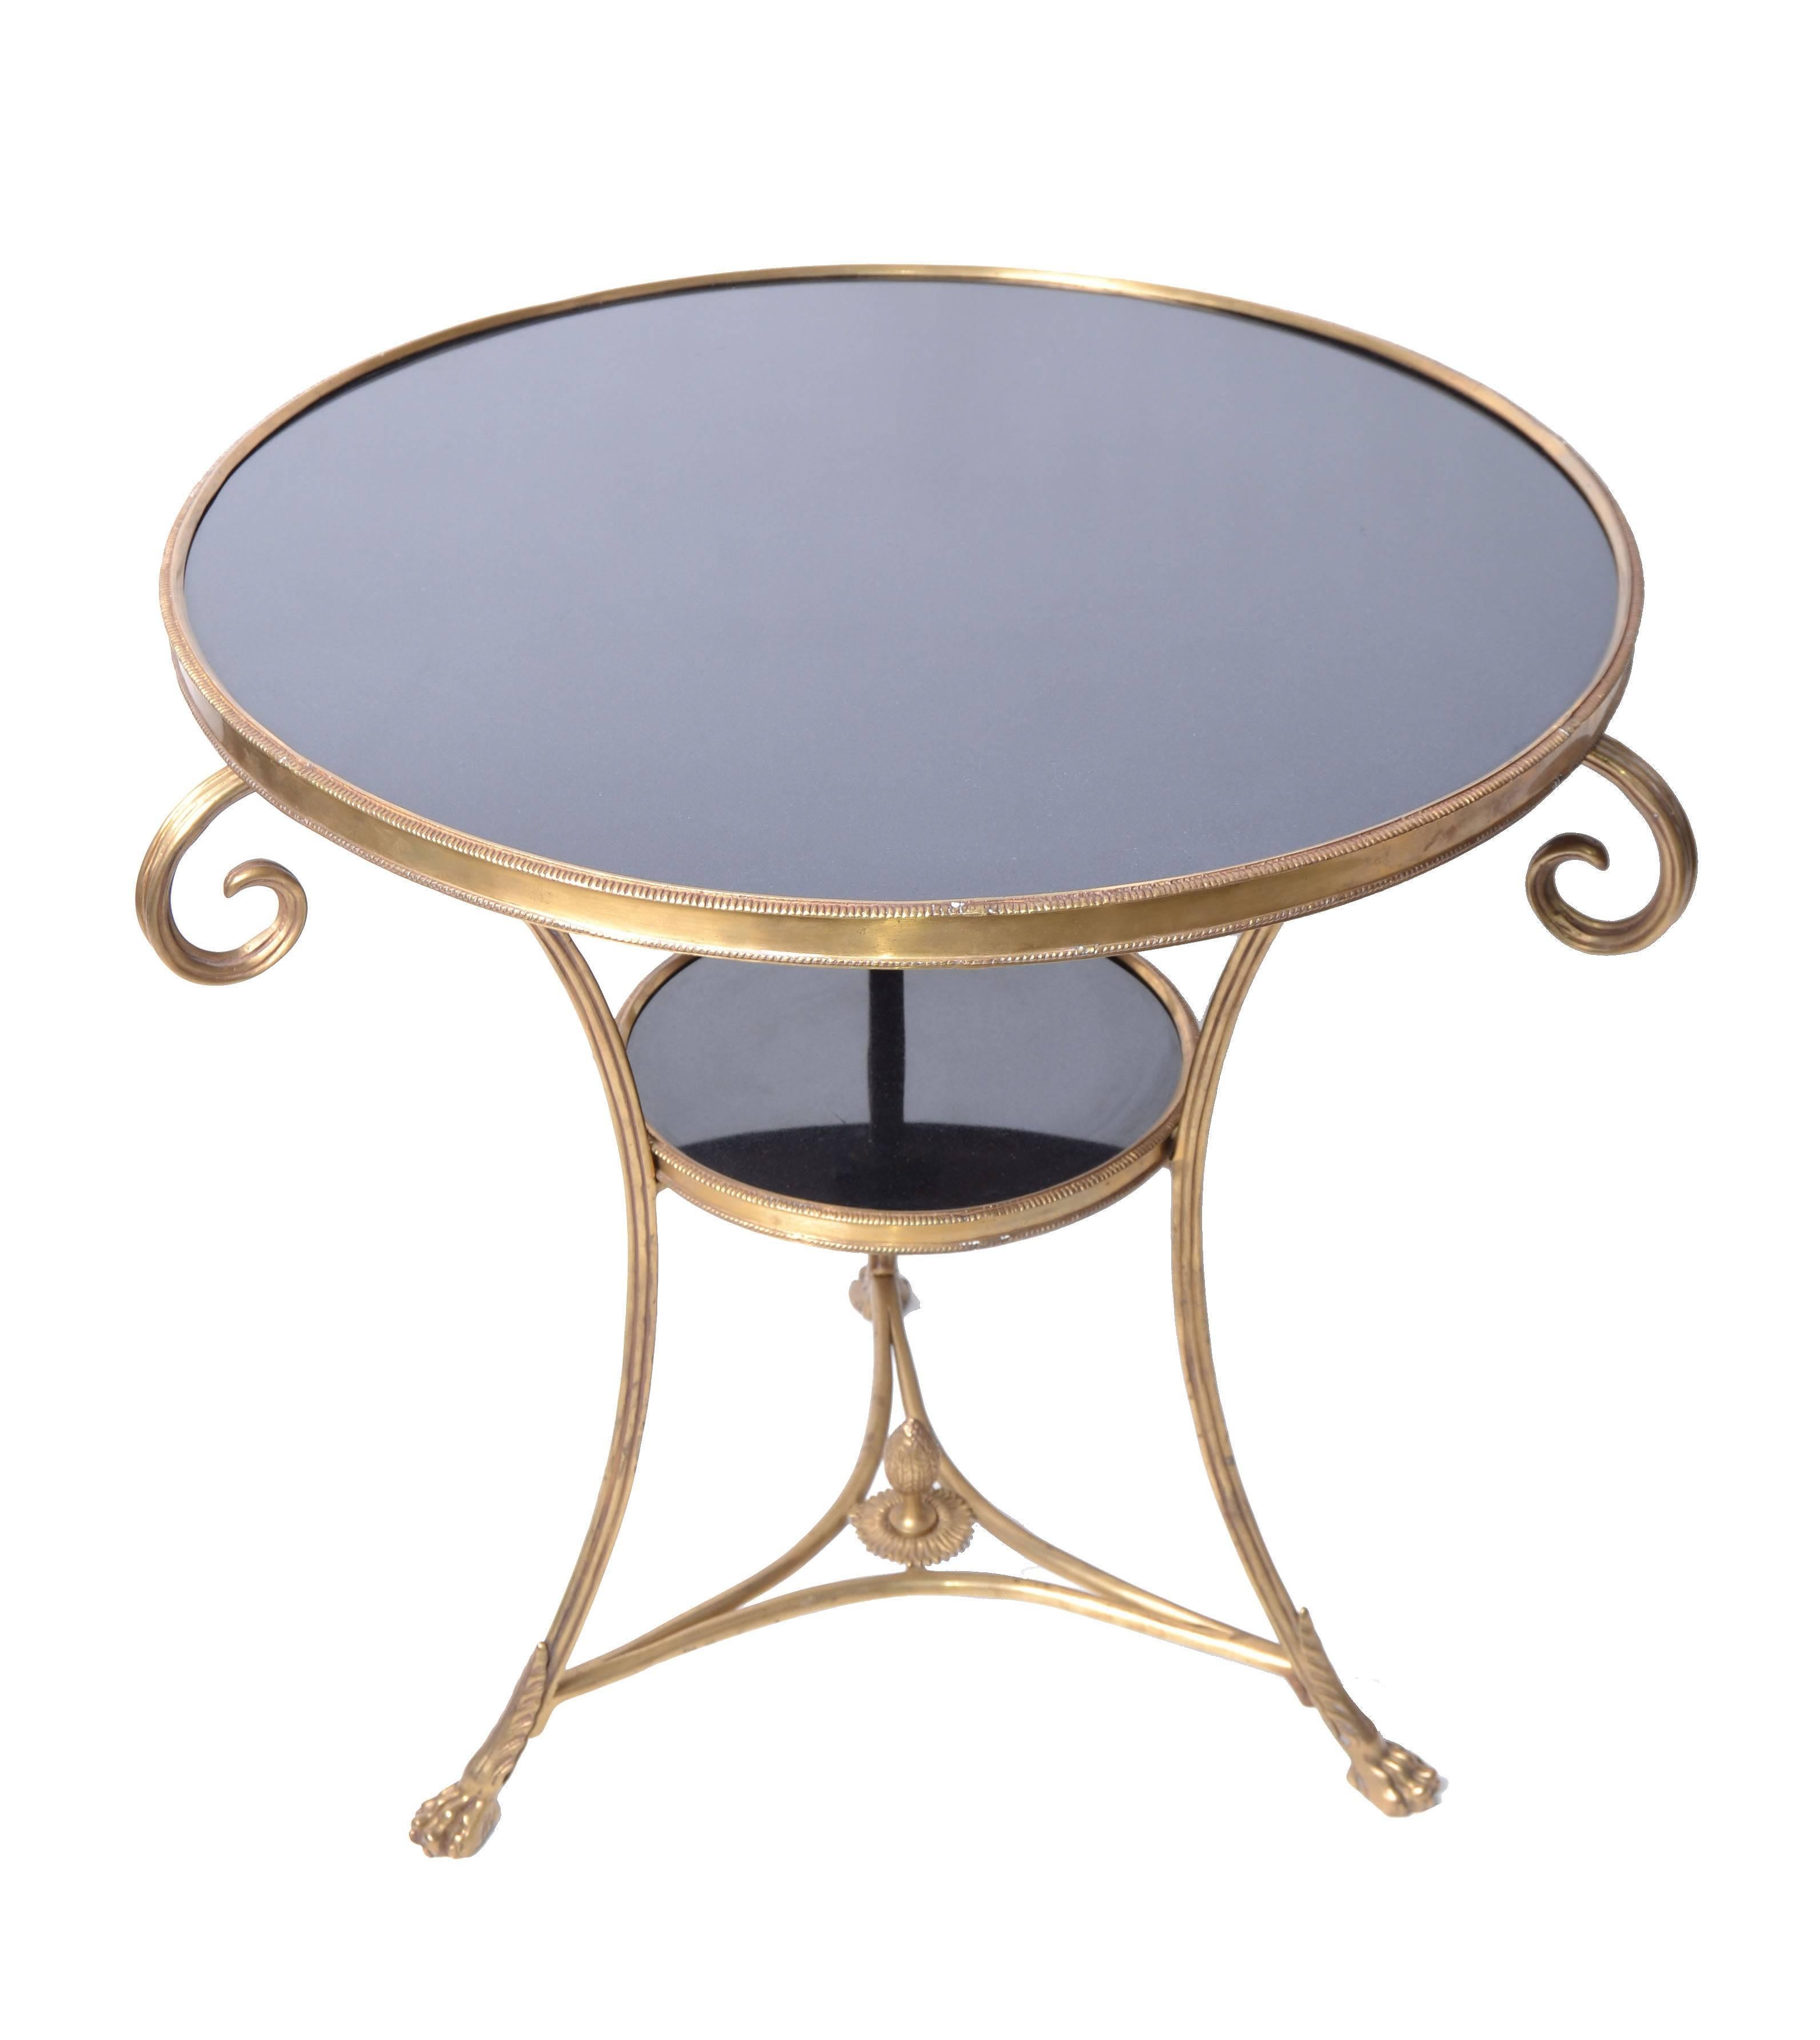 Decorative French brass and marble coffee table / side table with claw feet.
Heavy marble tops in black and well crafted brass details.